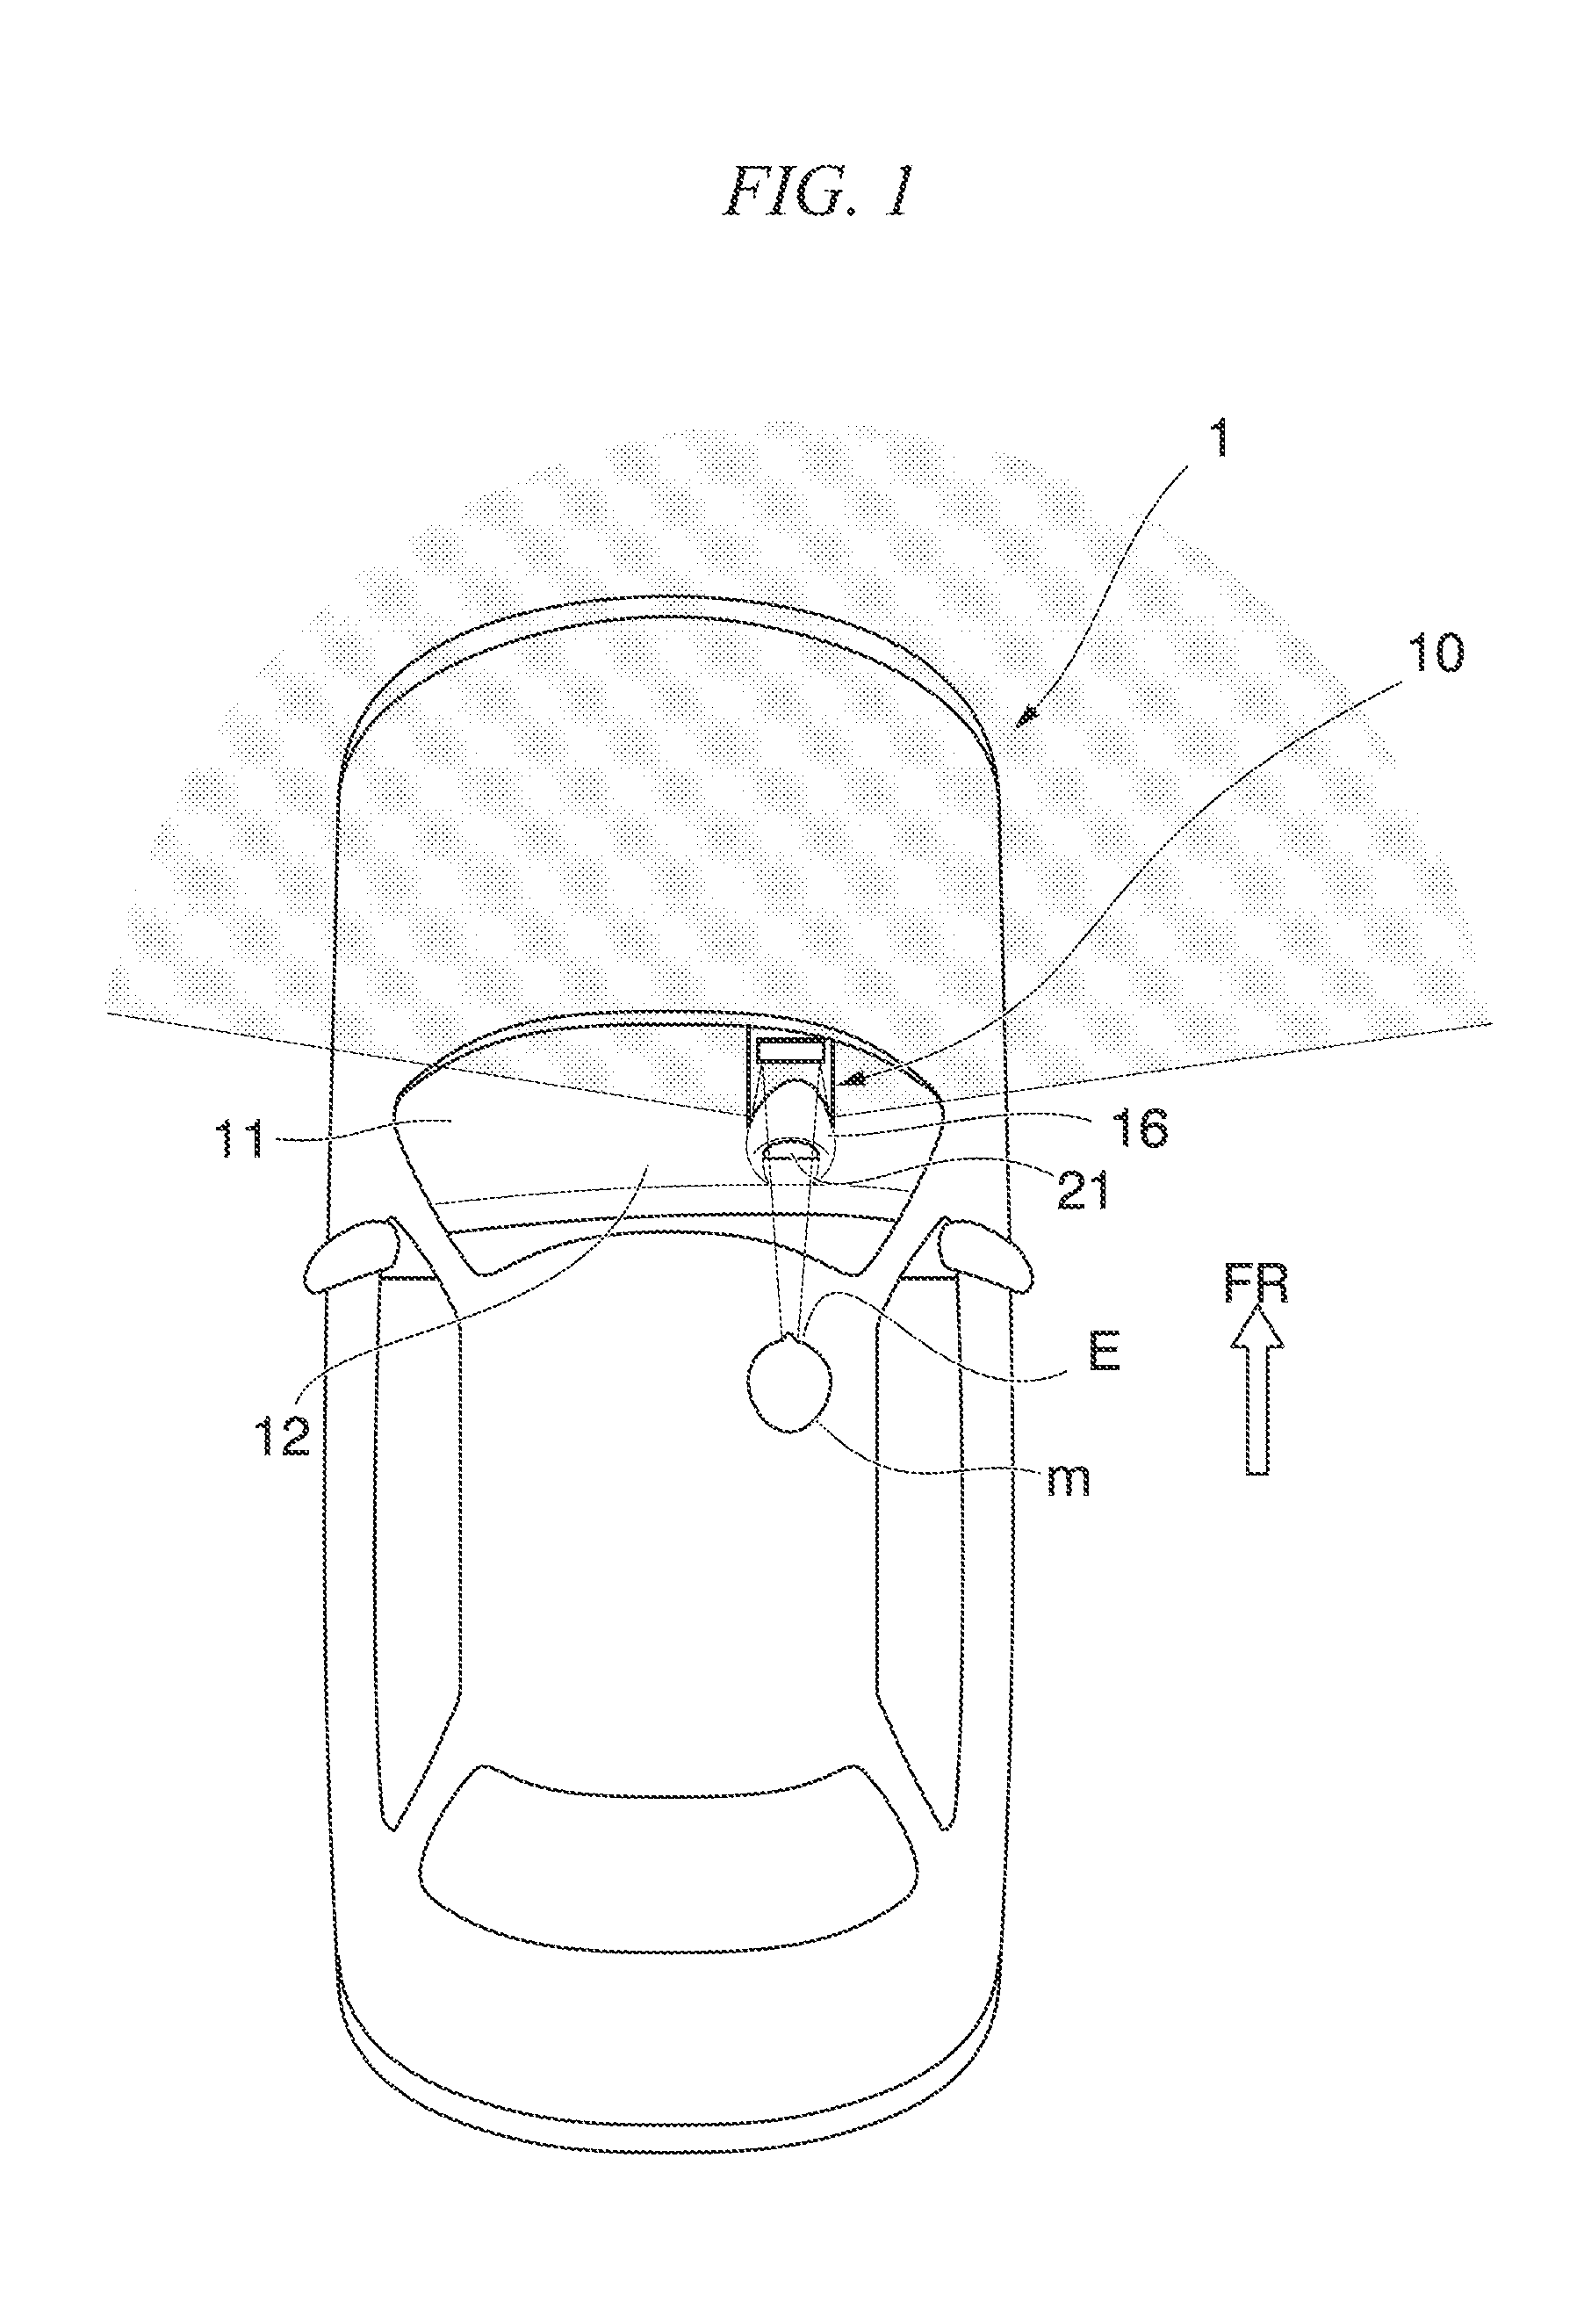 Device for visually confirming forward direction